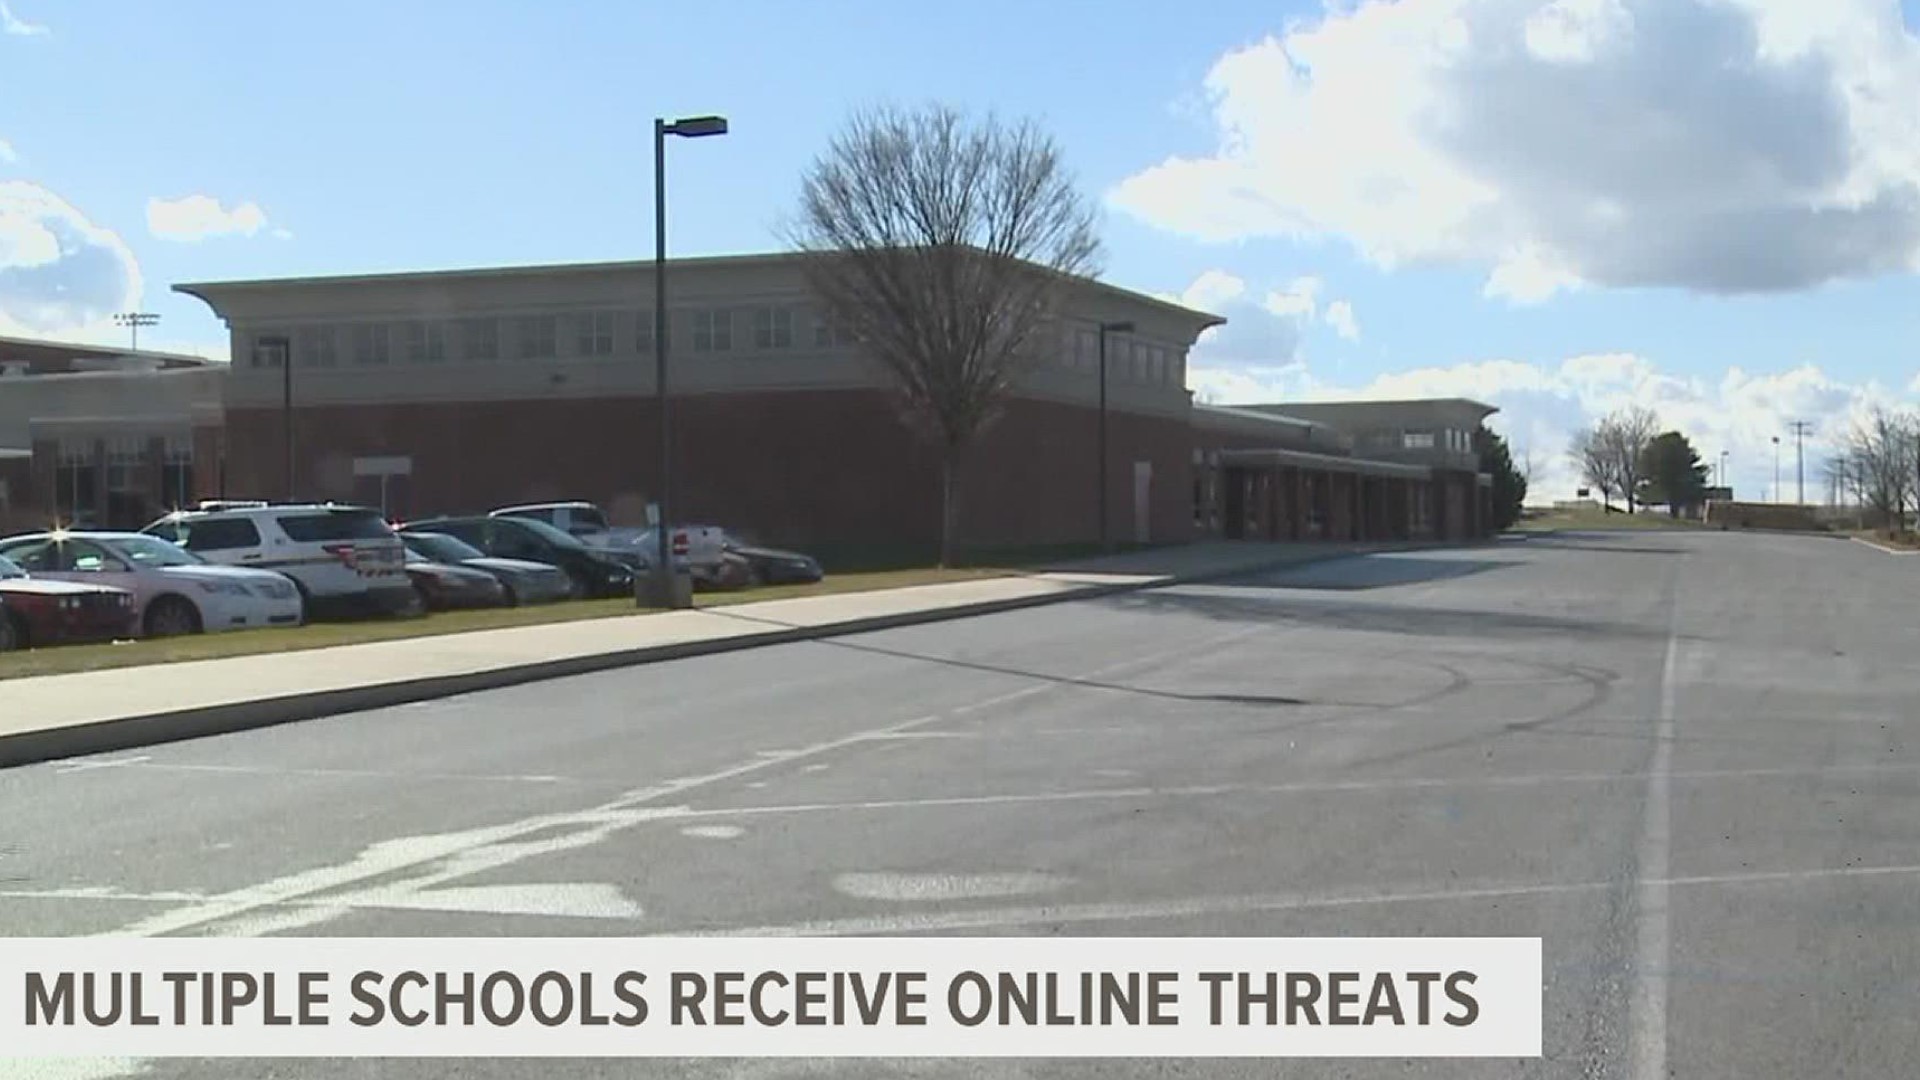 In less than a week, threats against schools circulating on social media forced the closure of two Central Pa. school districts and an investigation at a third.